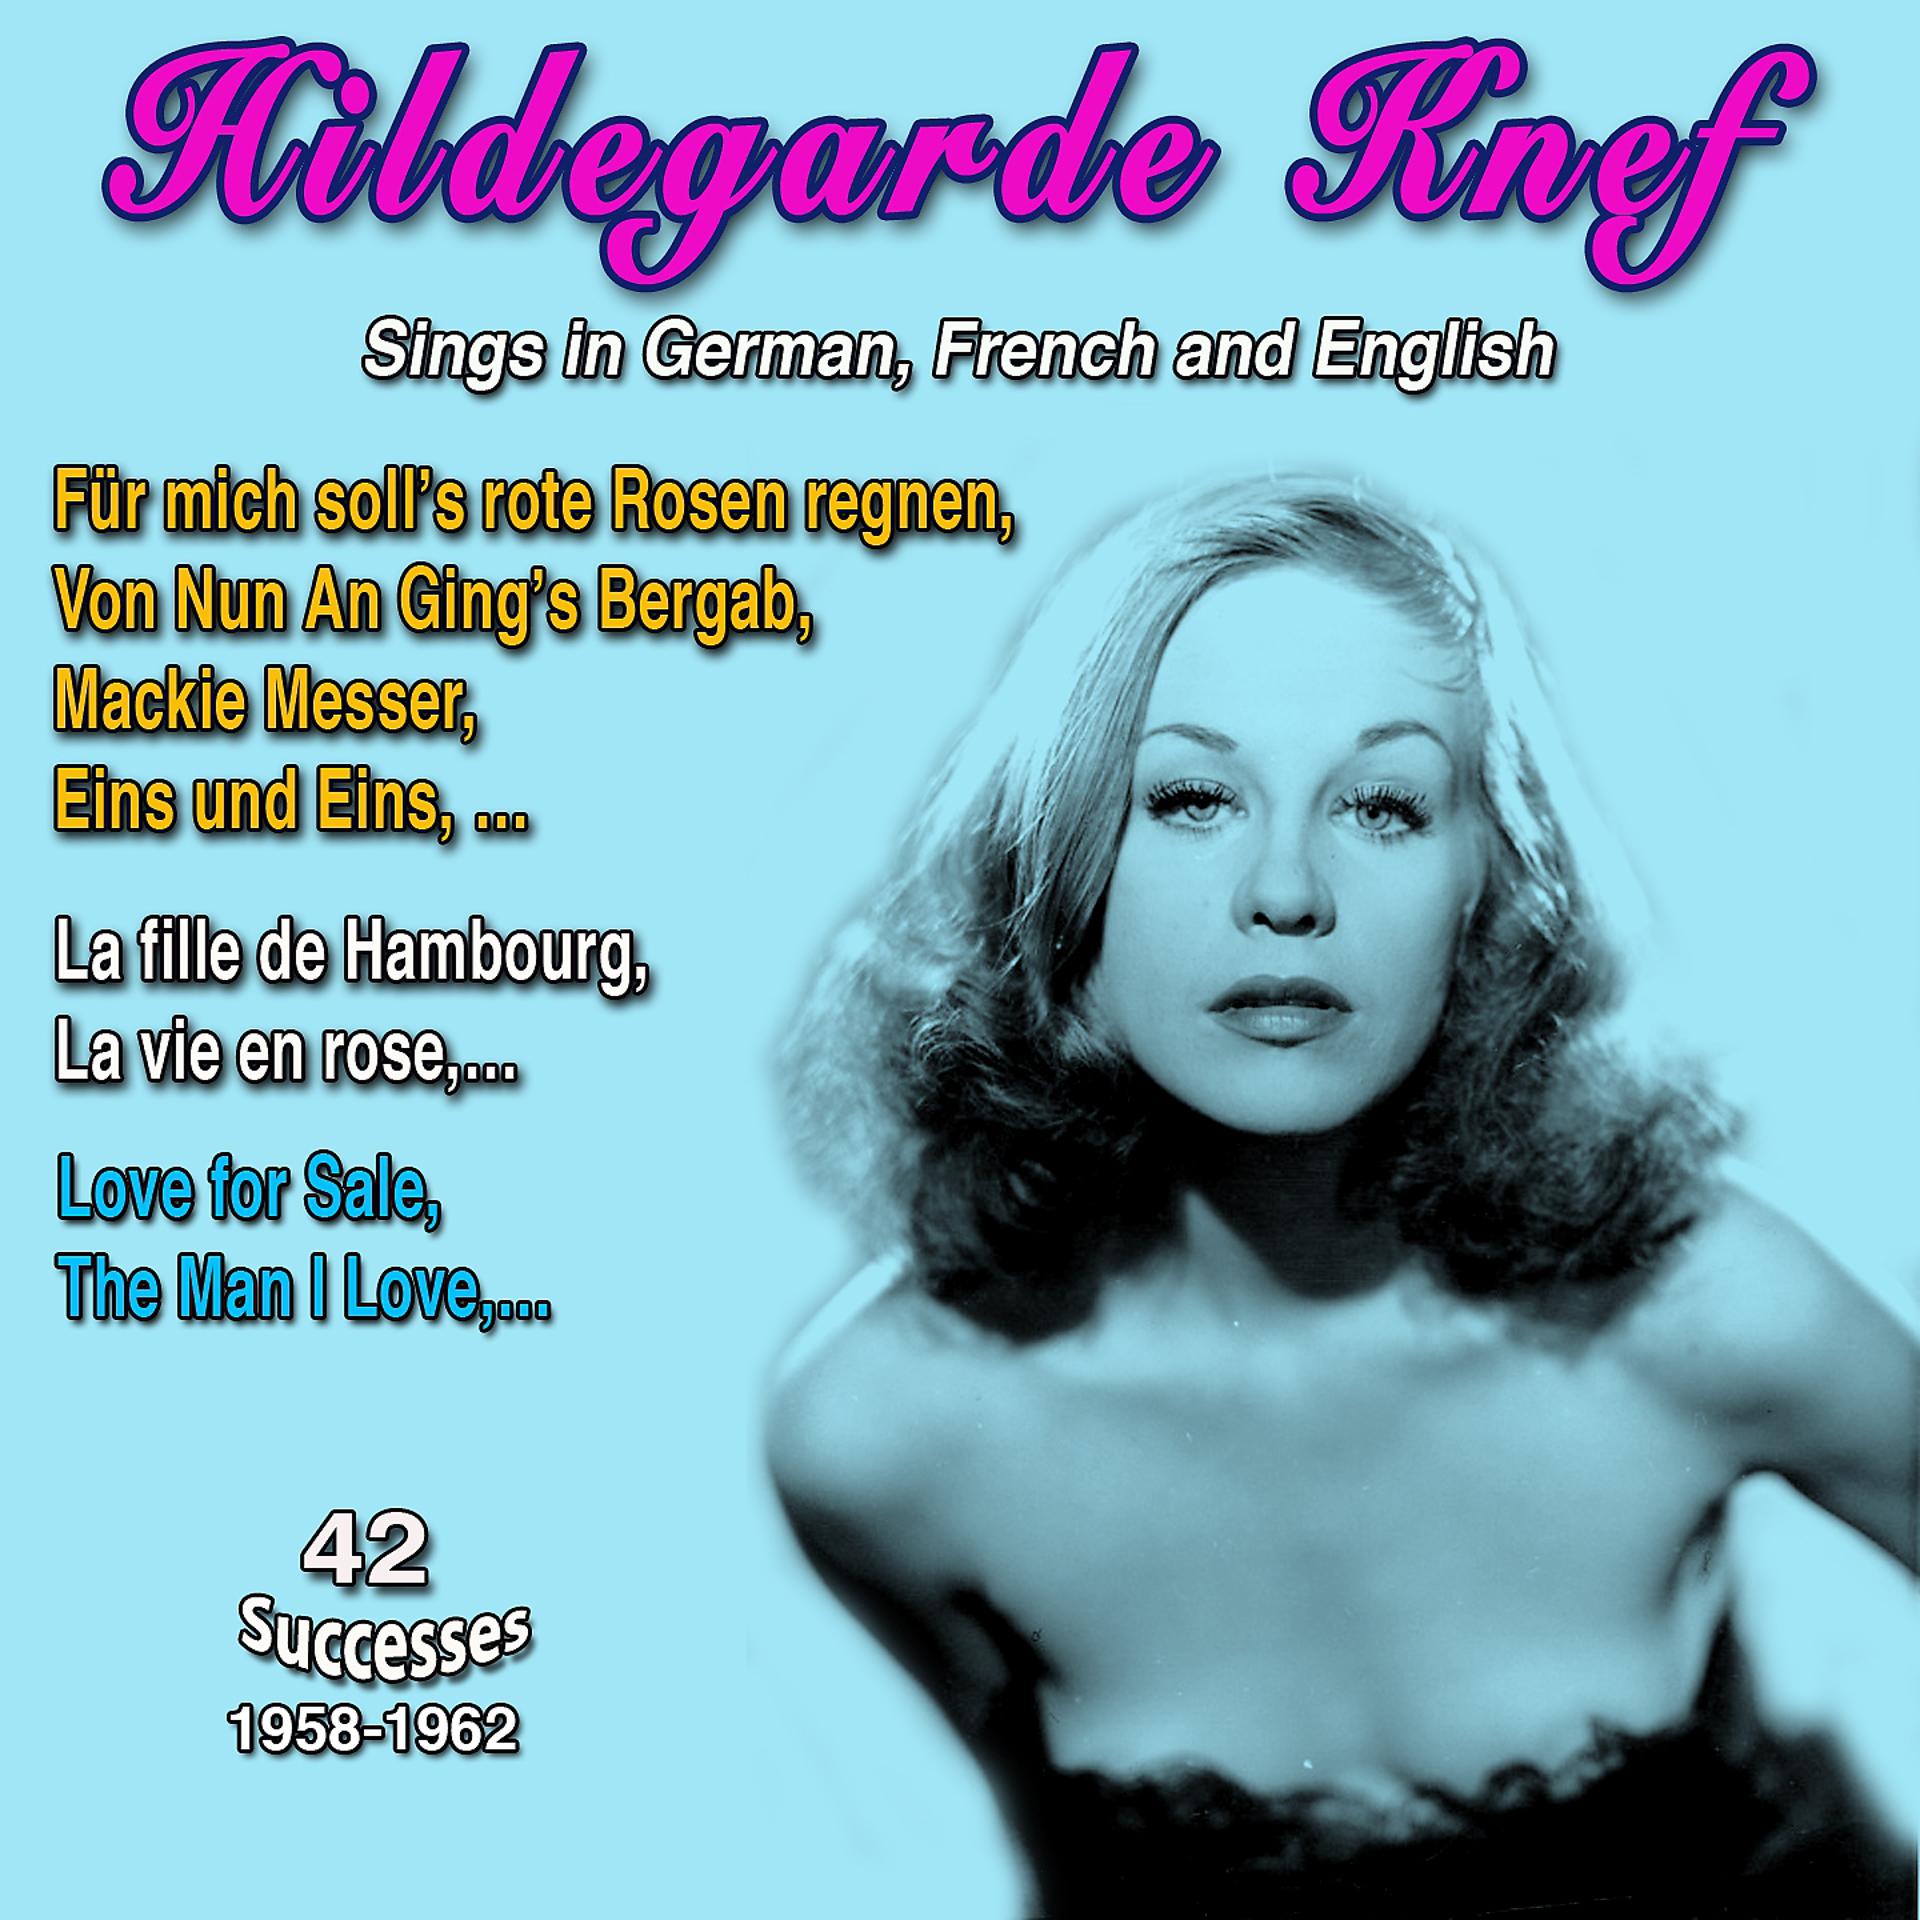 Постер альбома Hildergarde Knef Sings in German, French and English (42 Successes 1962)